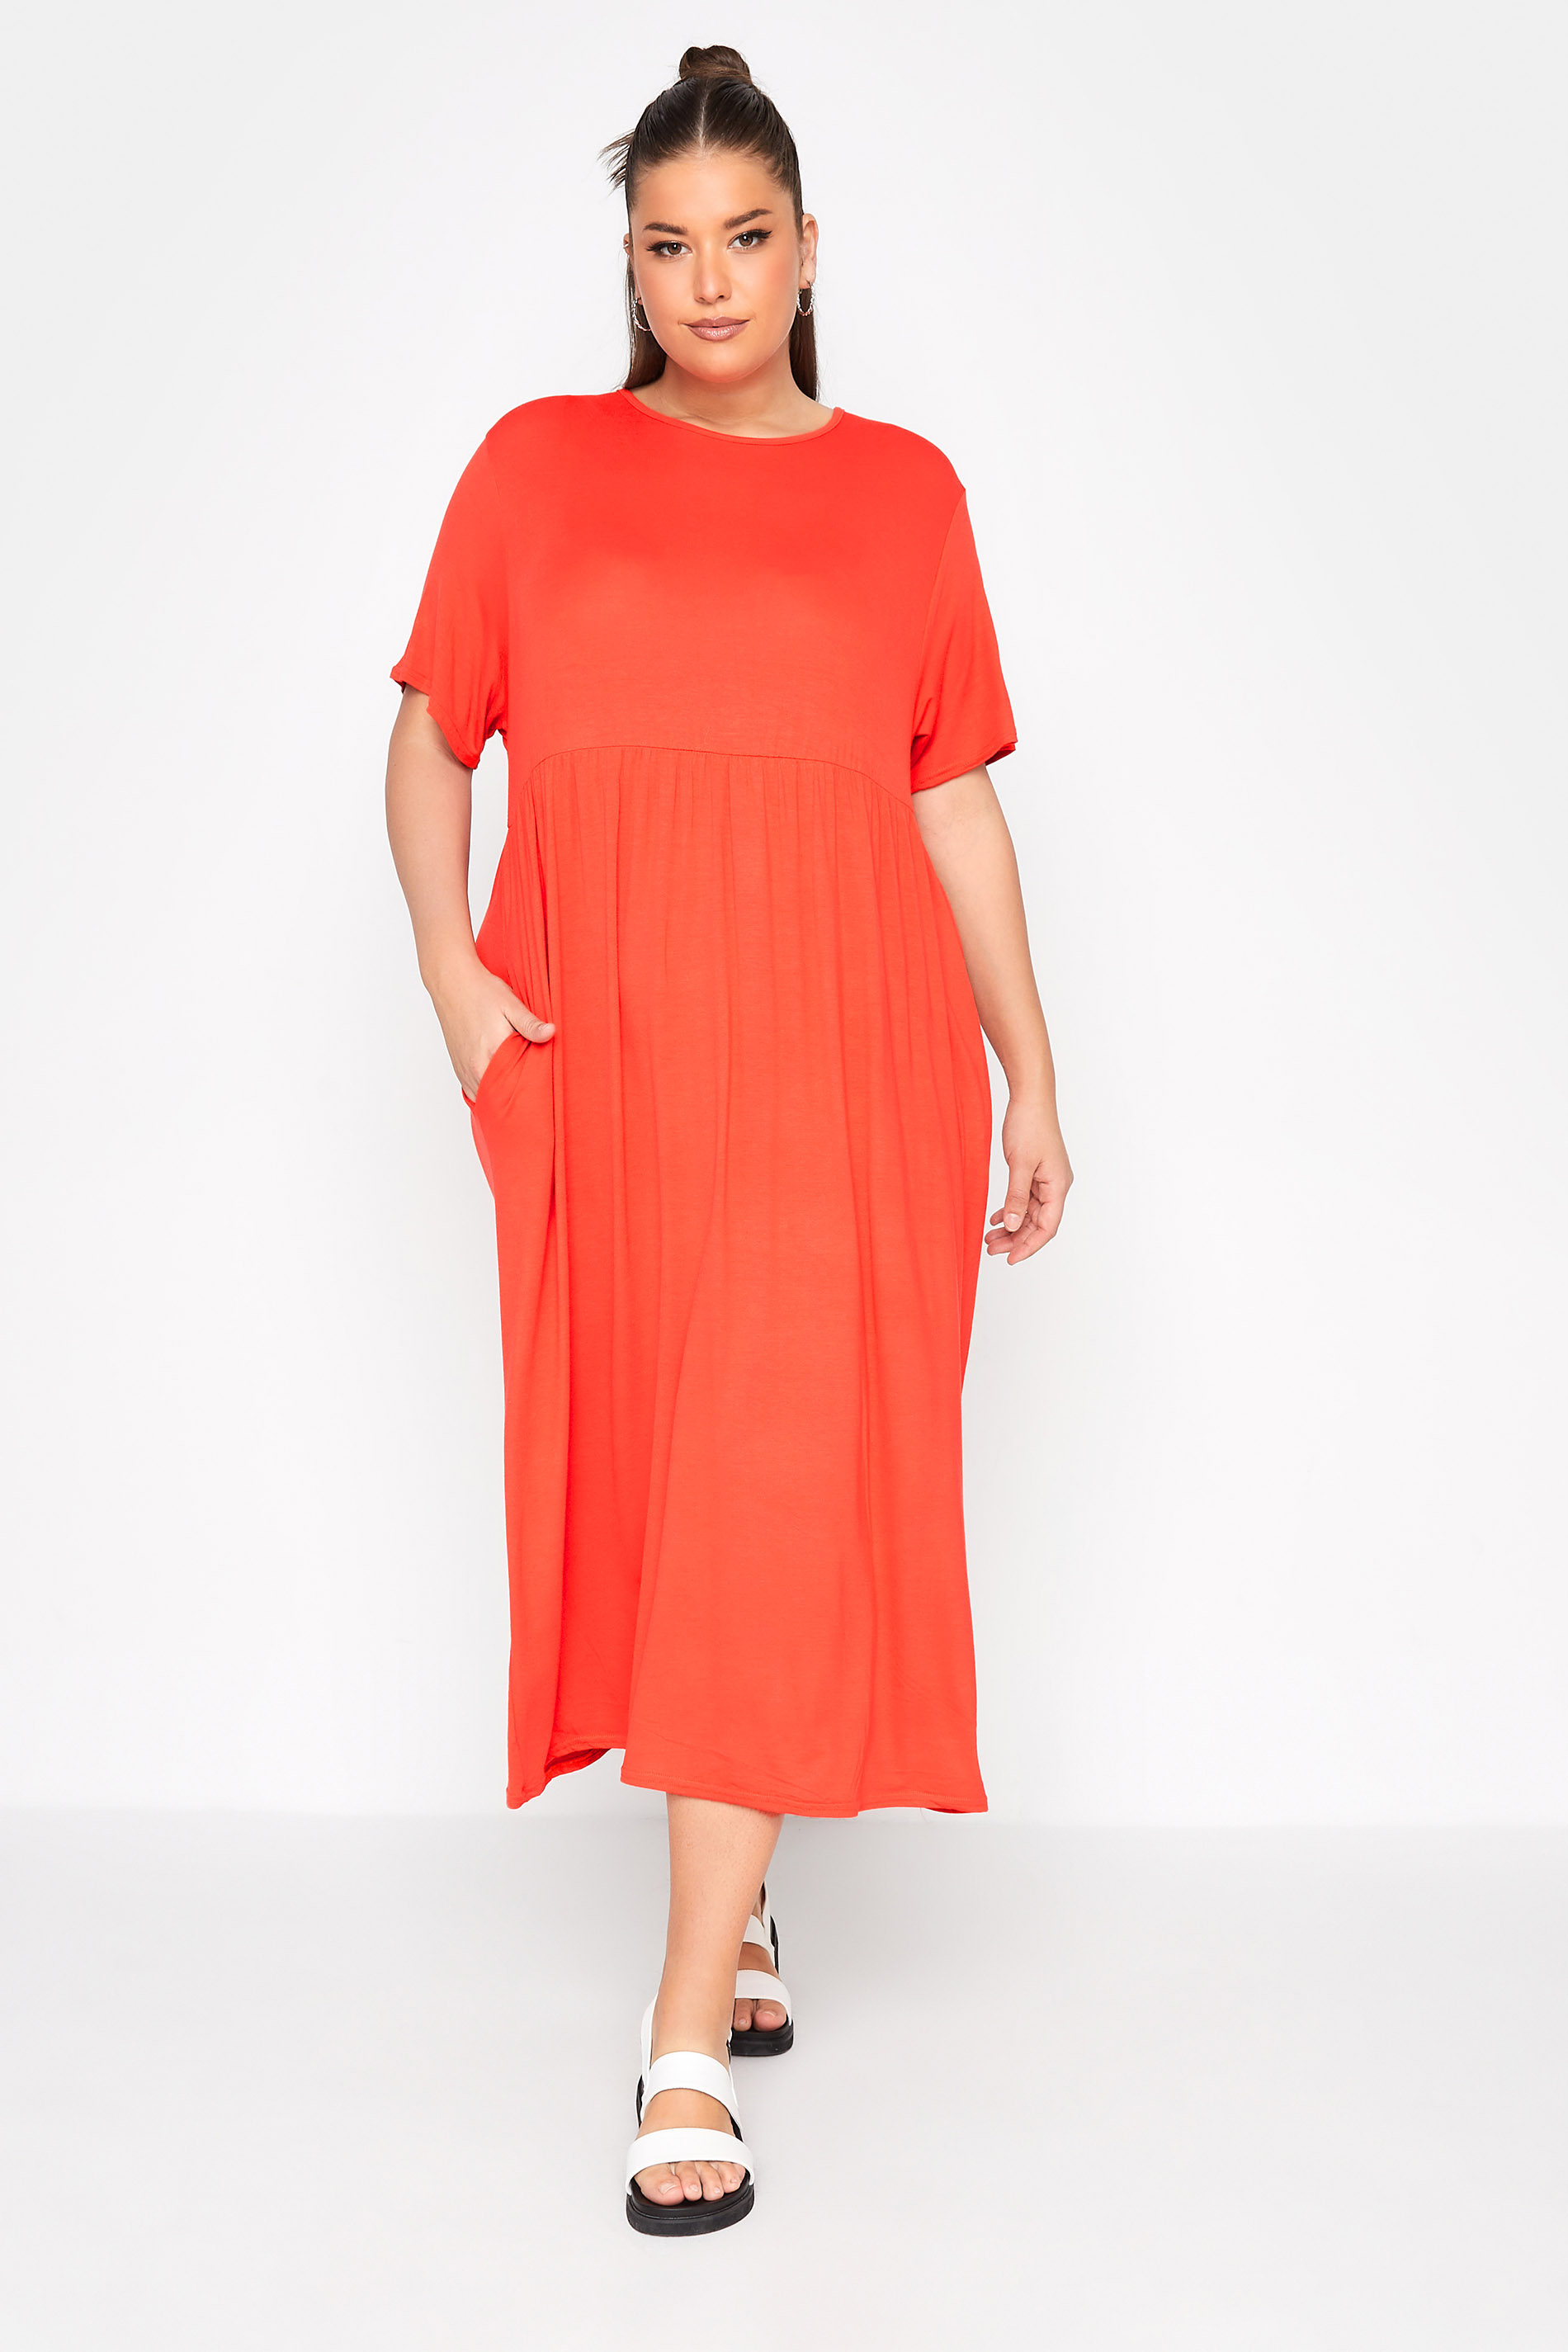 LIMITED COLLECTION Curve Orange Throw On Maxi Dress 1